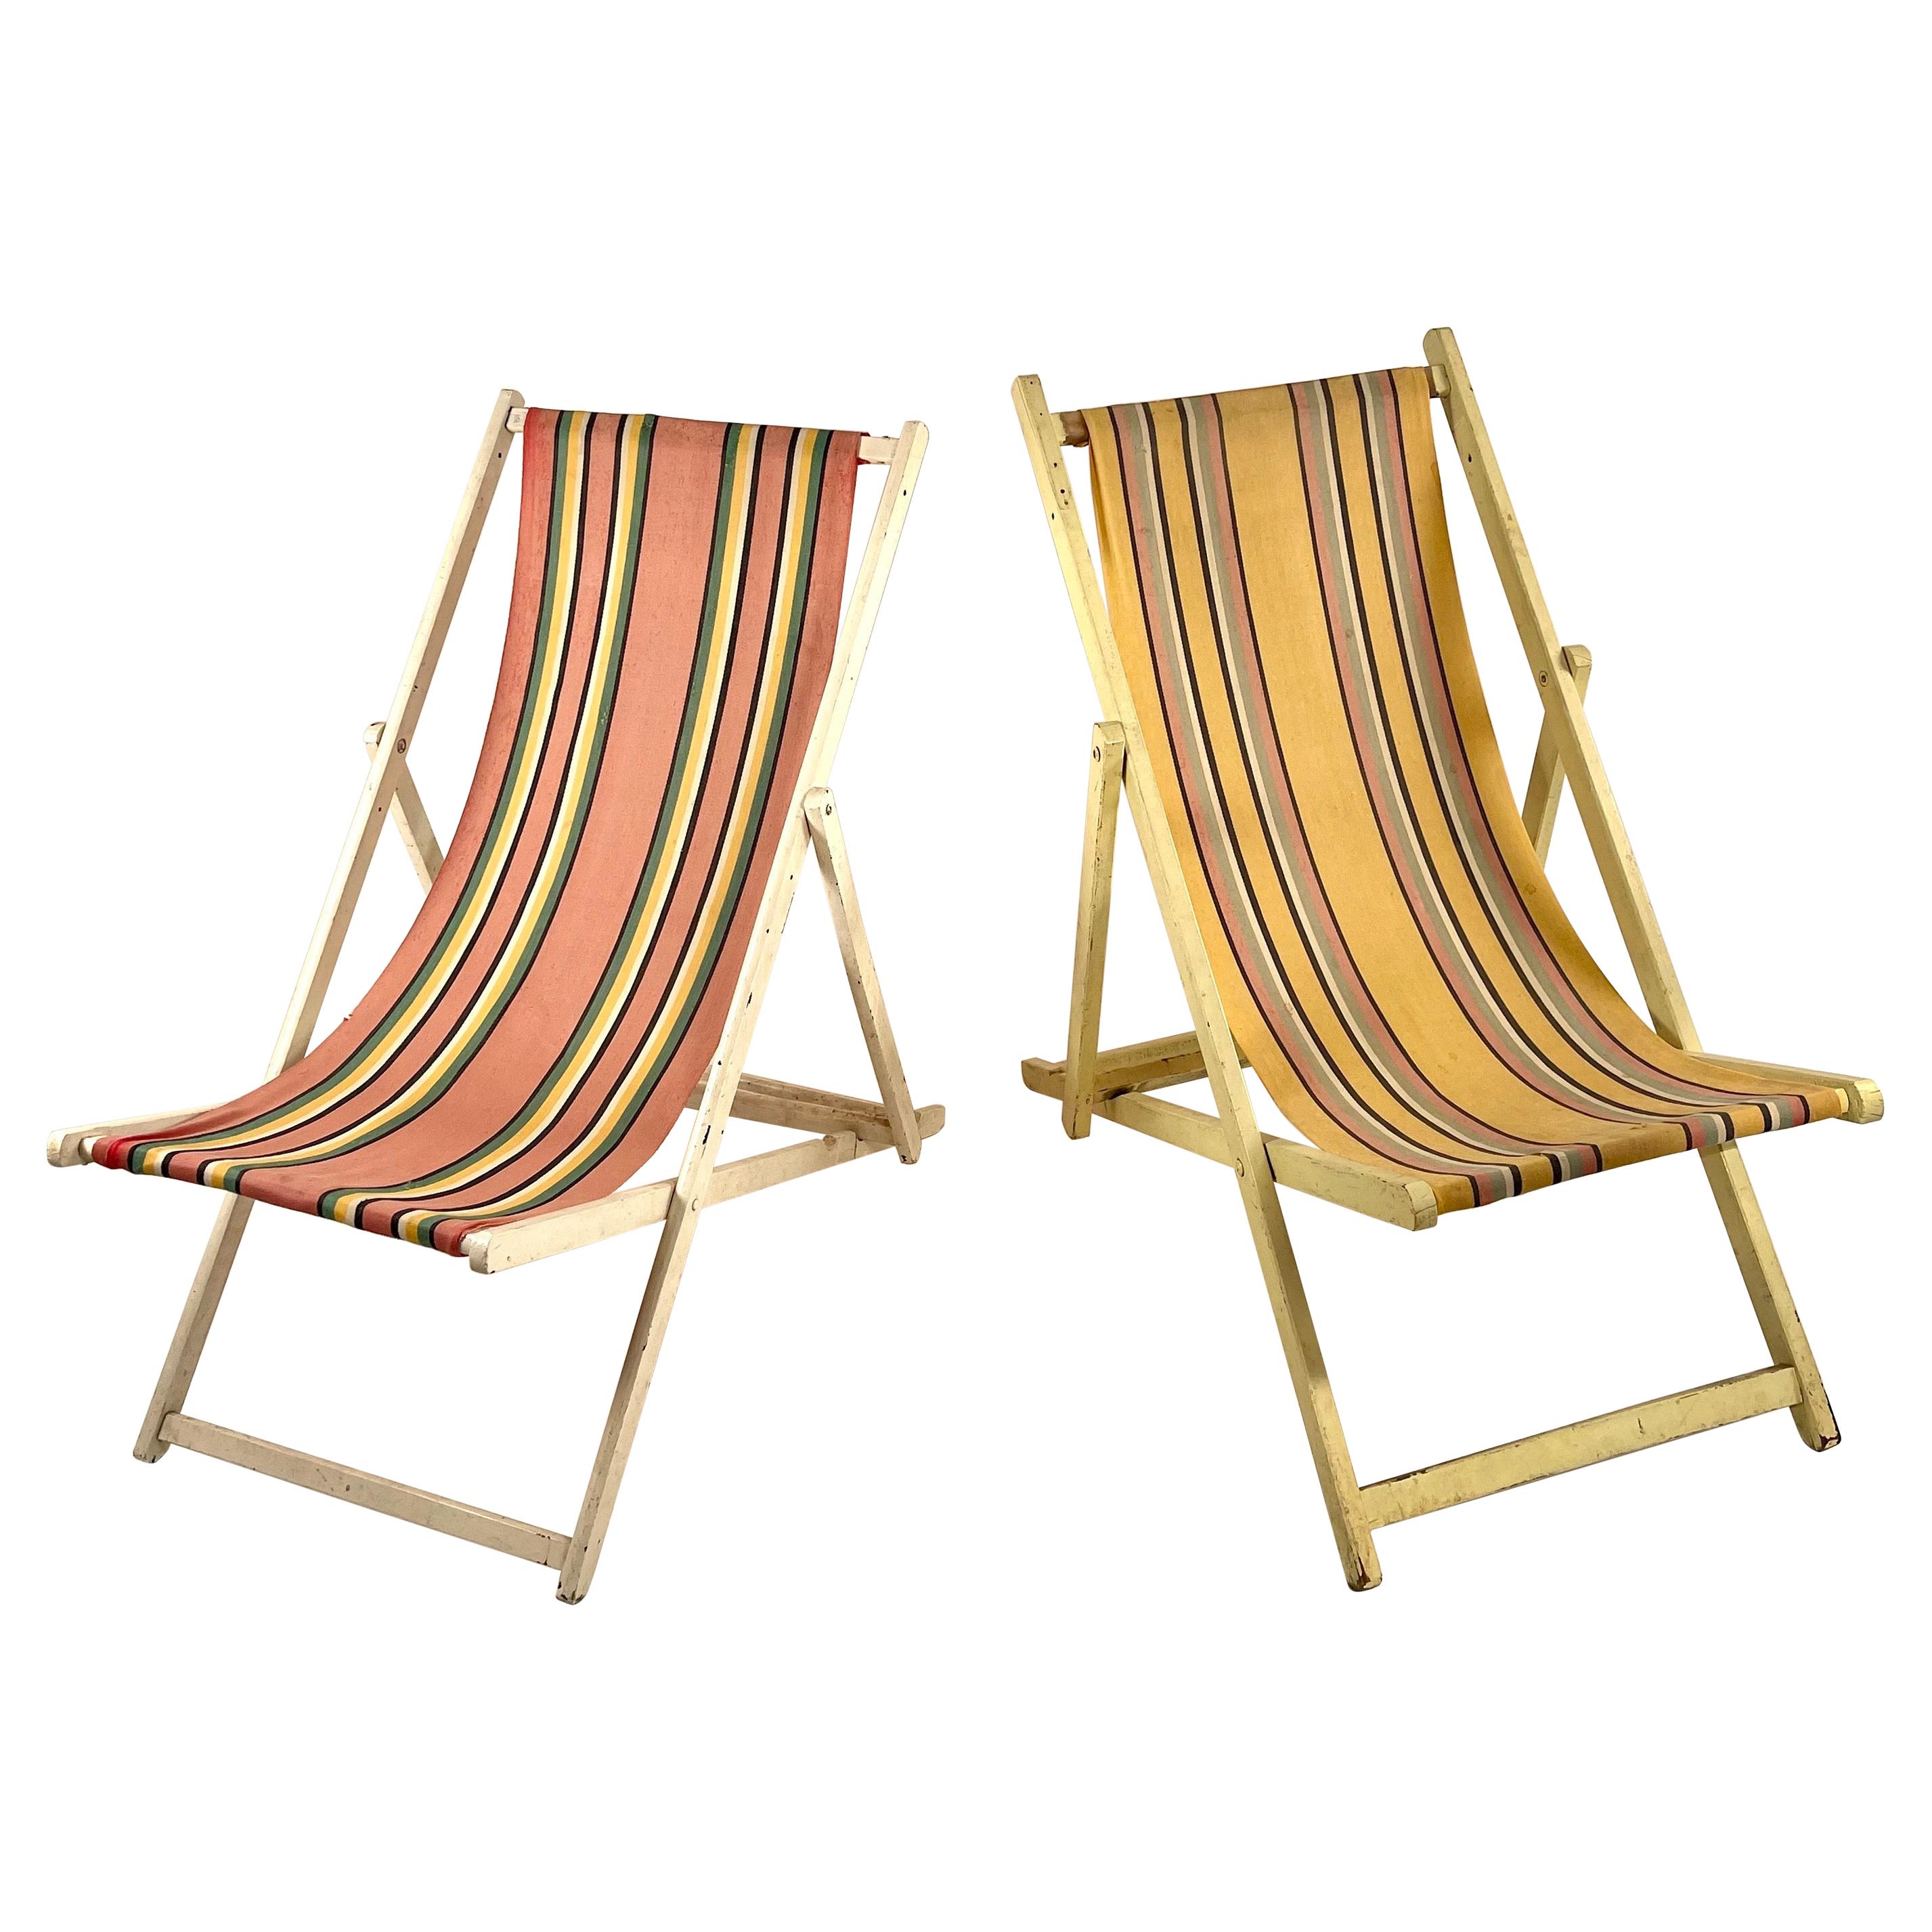 Classic English Striped Canvas Outdoor Folding Garden or Beach Chairs Set of 2